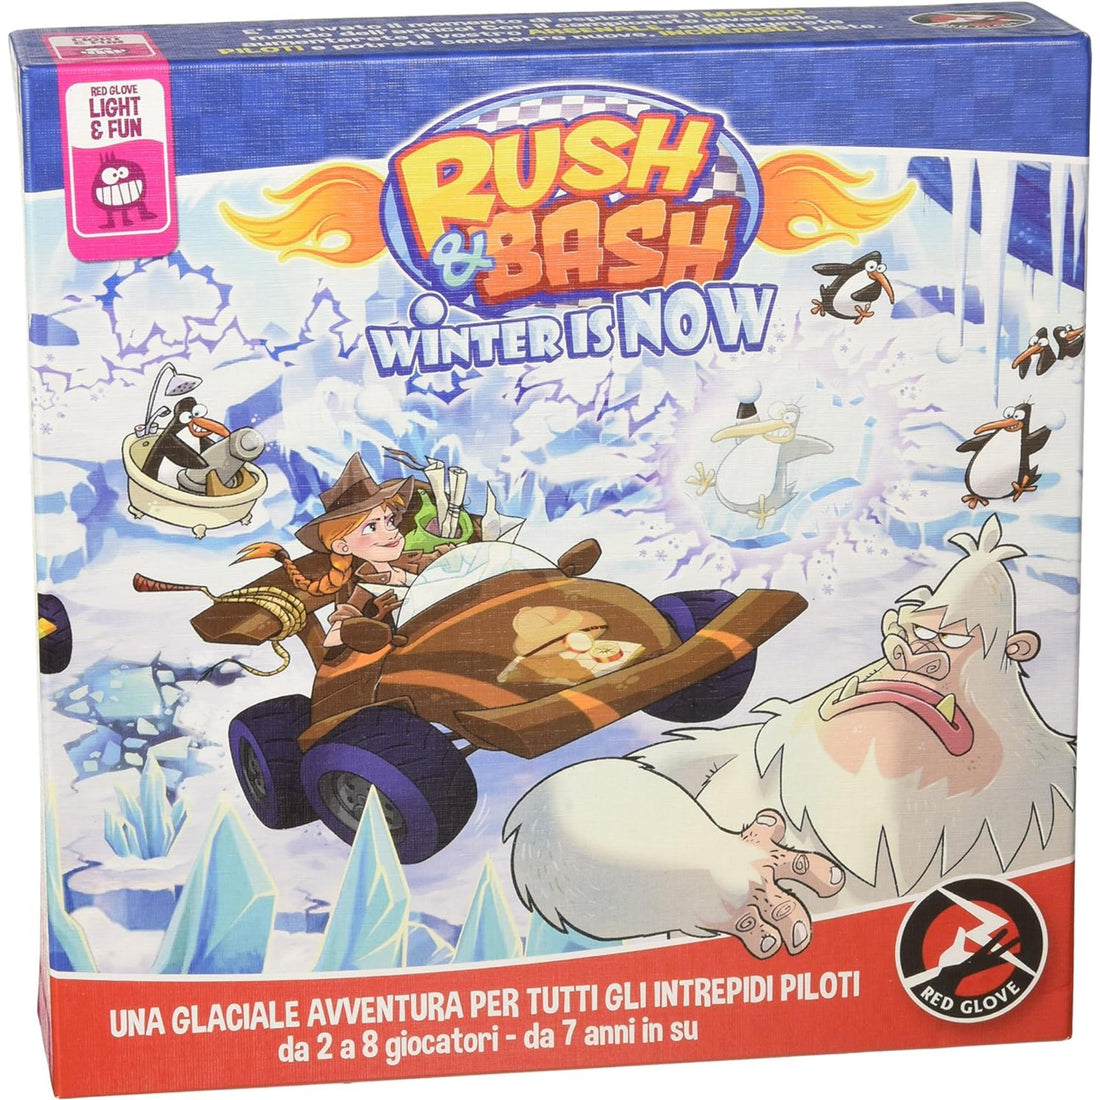 Rush & Bash - Winter is Now - Espansione